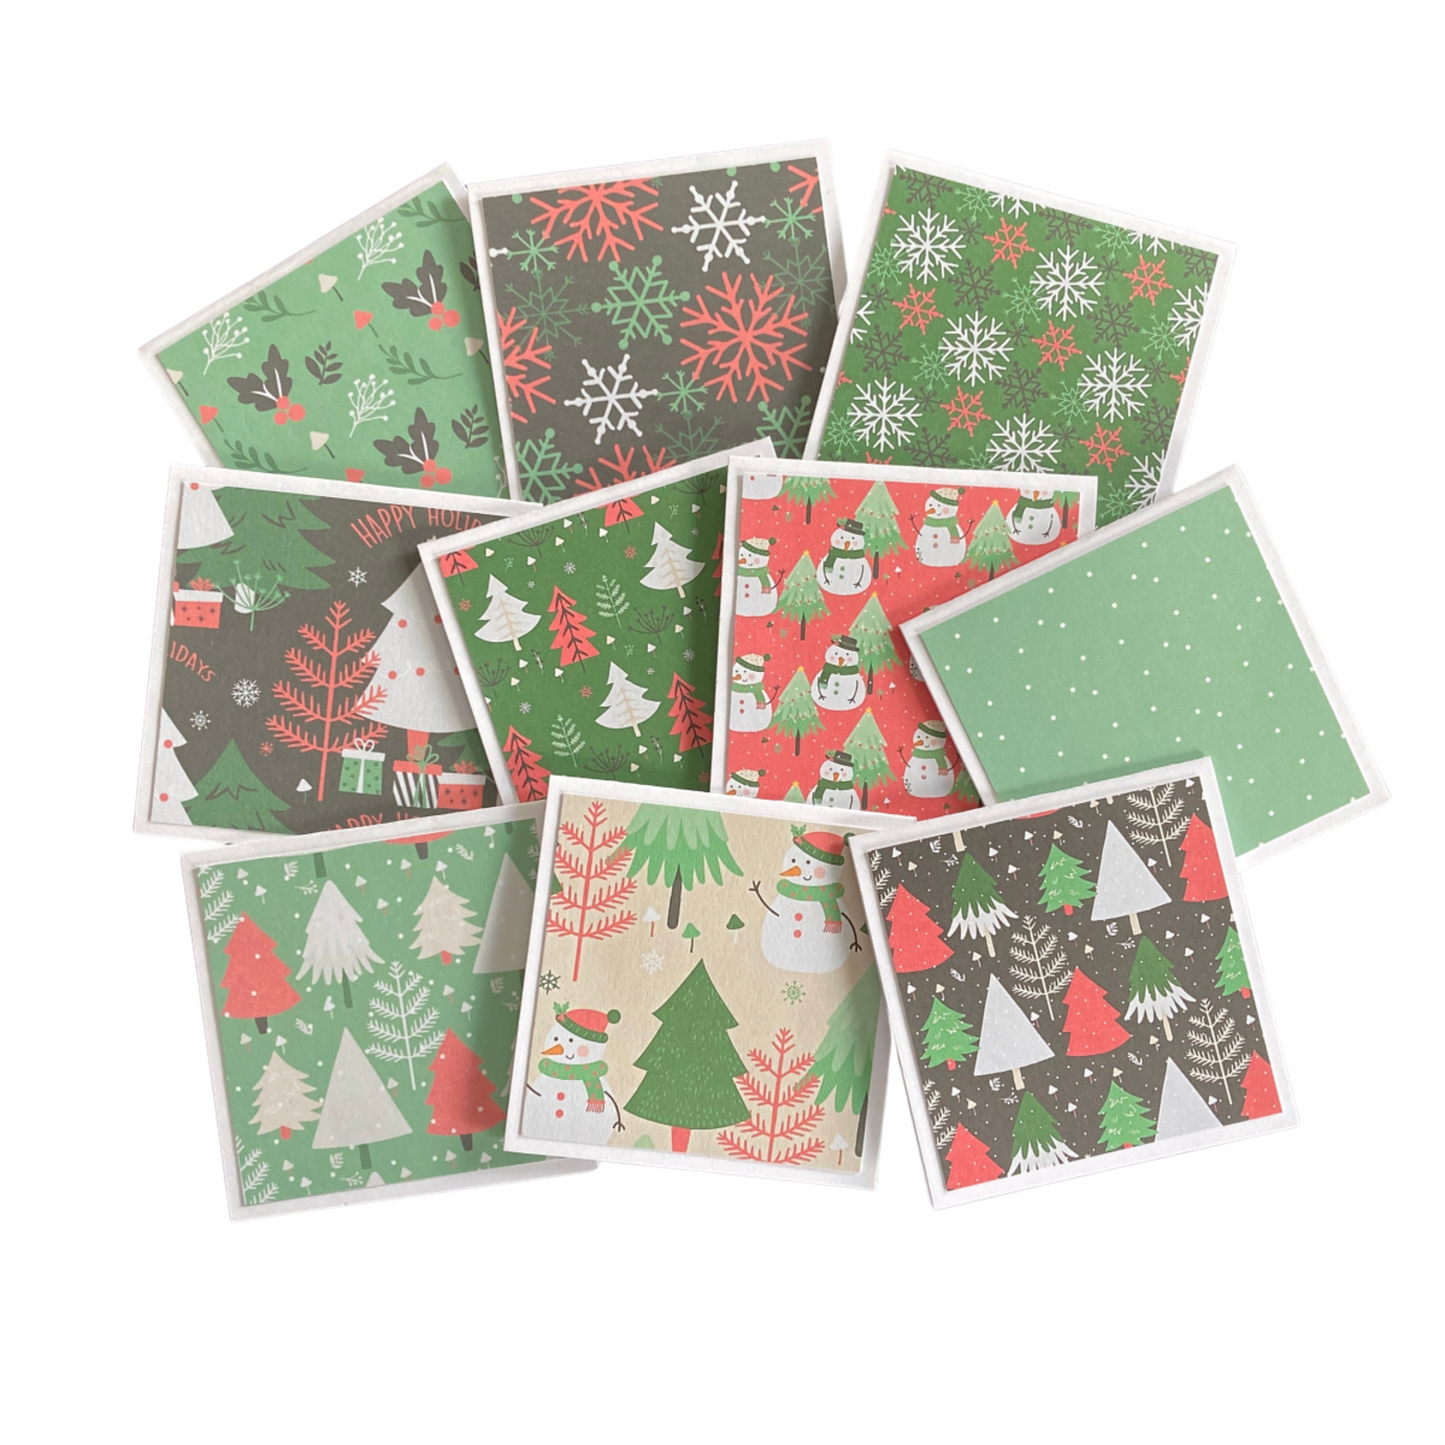 3x3 Winter Holidays Note Cards